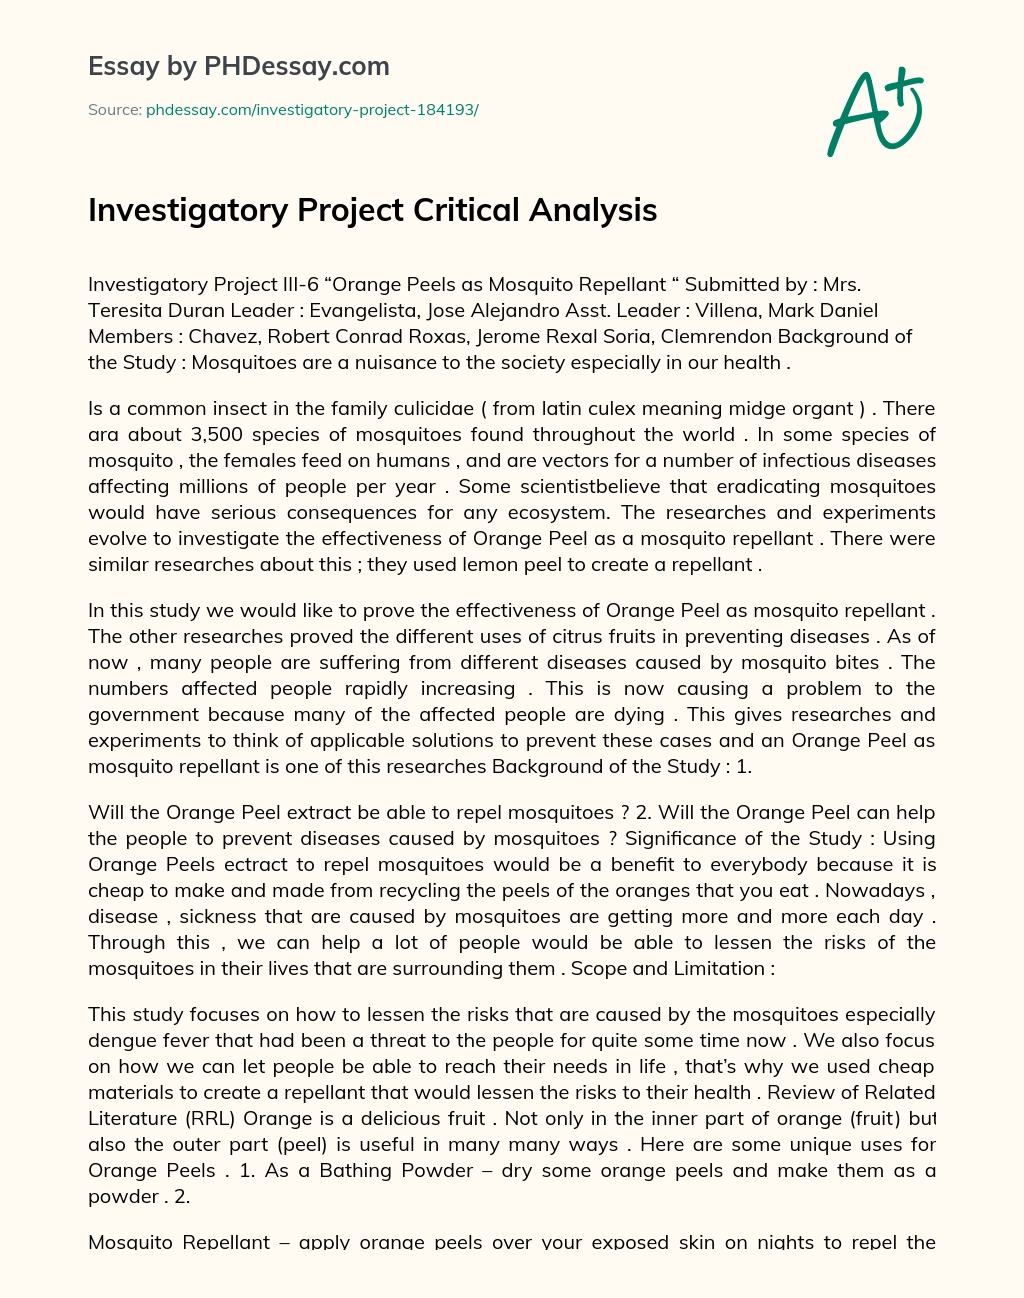 Investigatory Project Critical Analysis essay